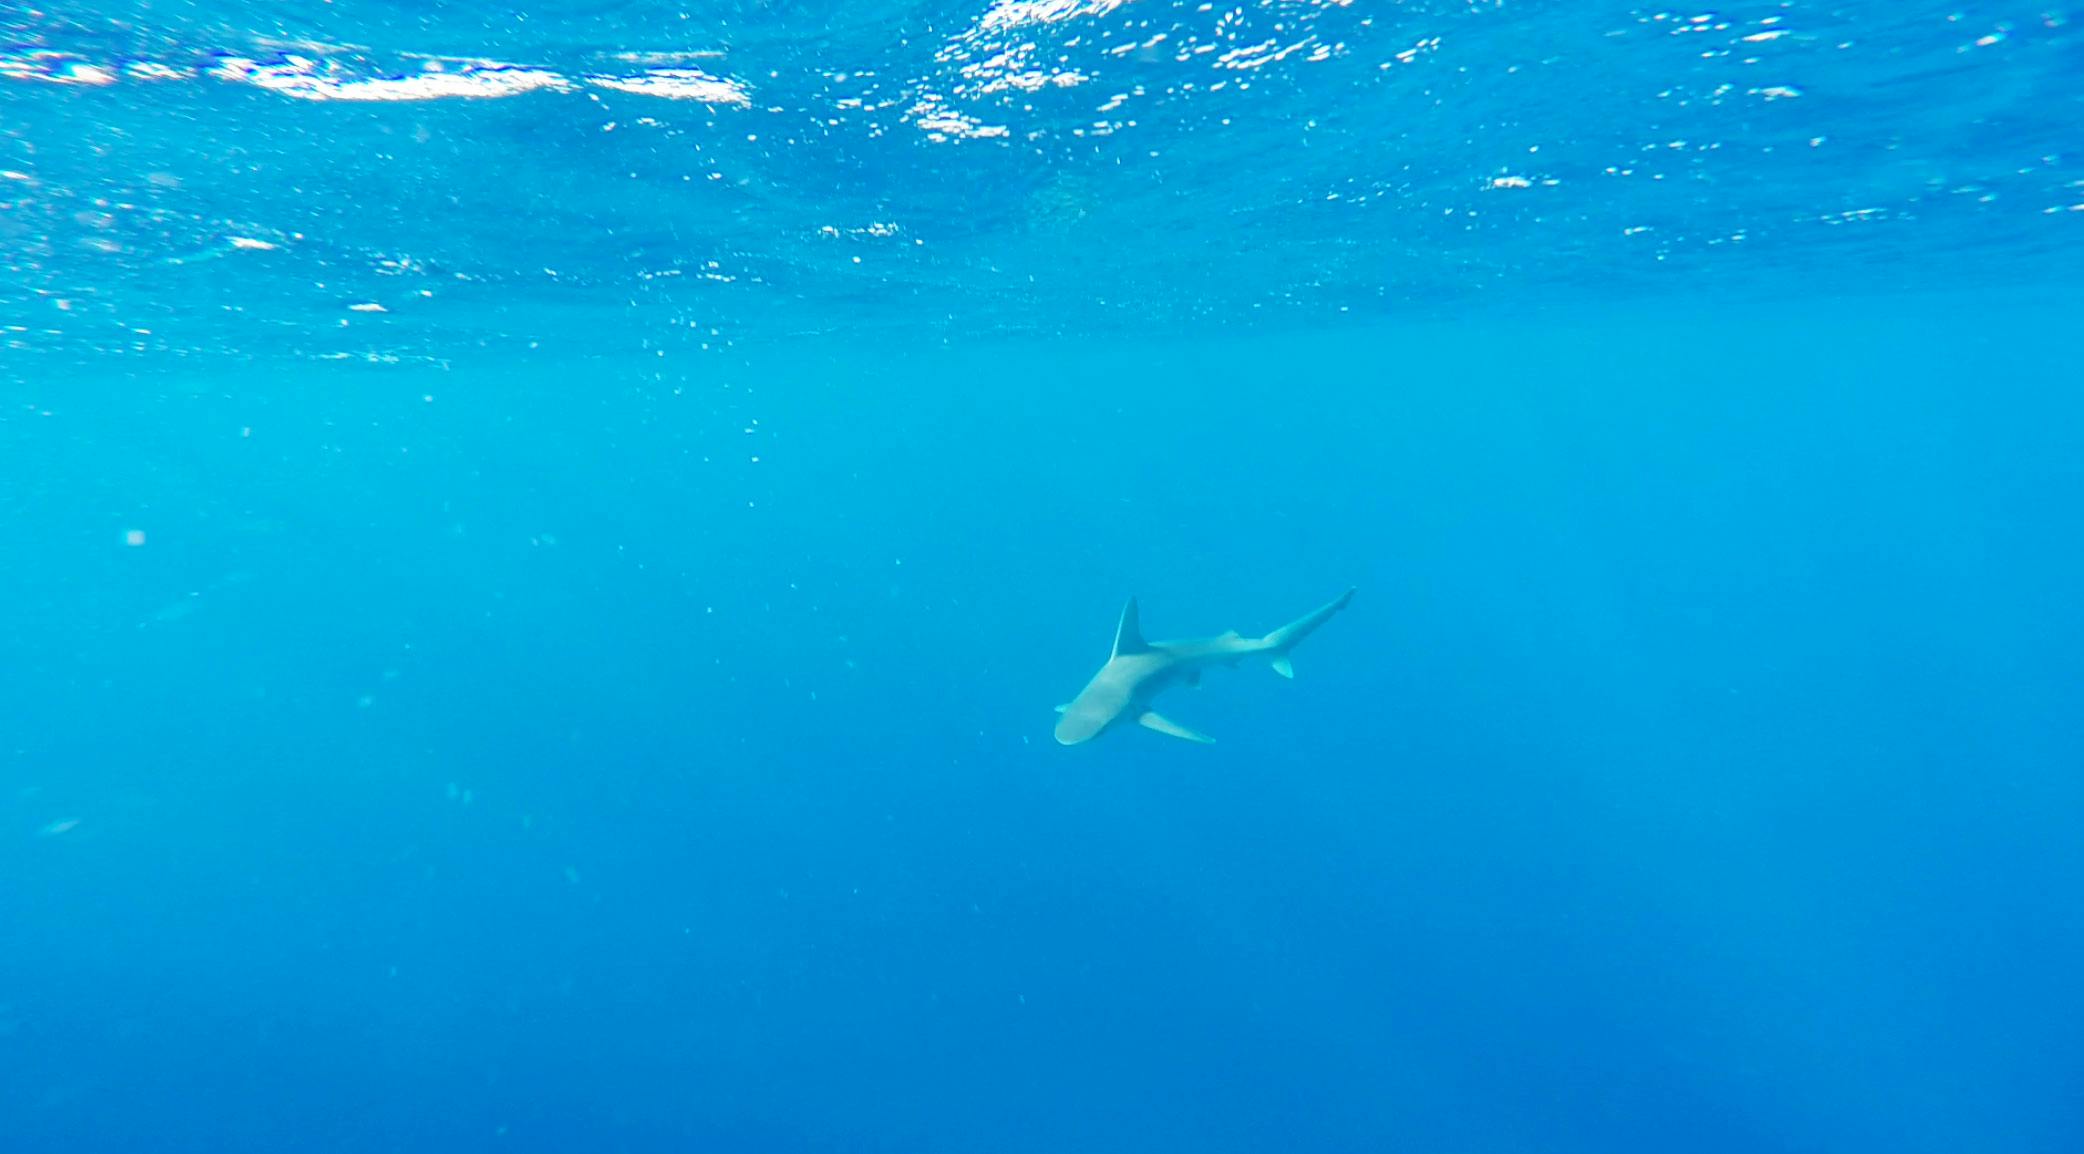 a shark swimming in blue water